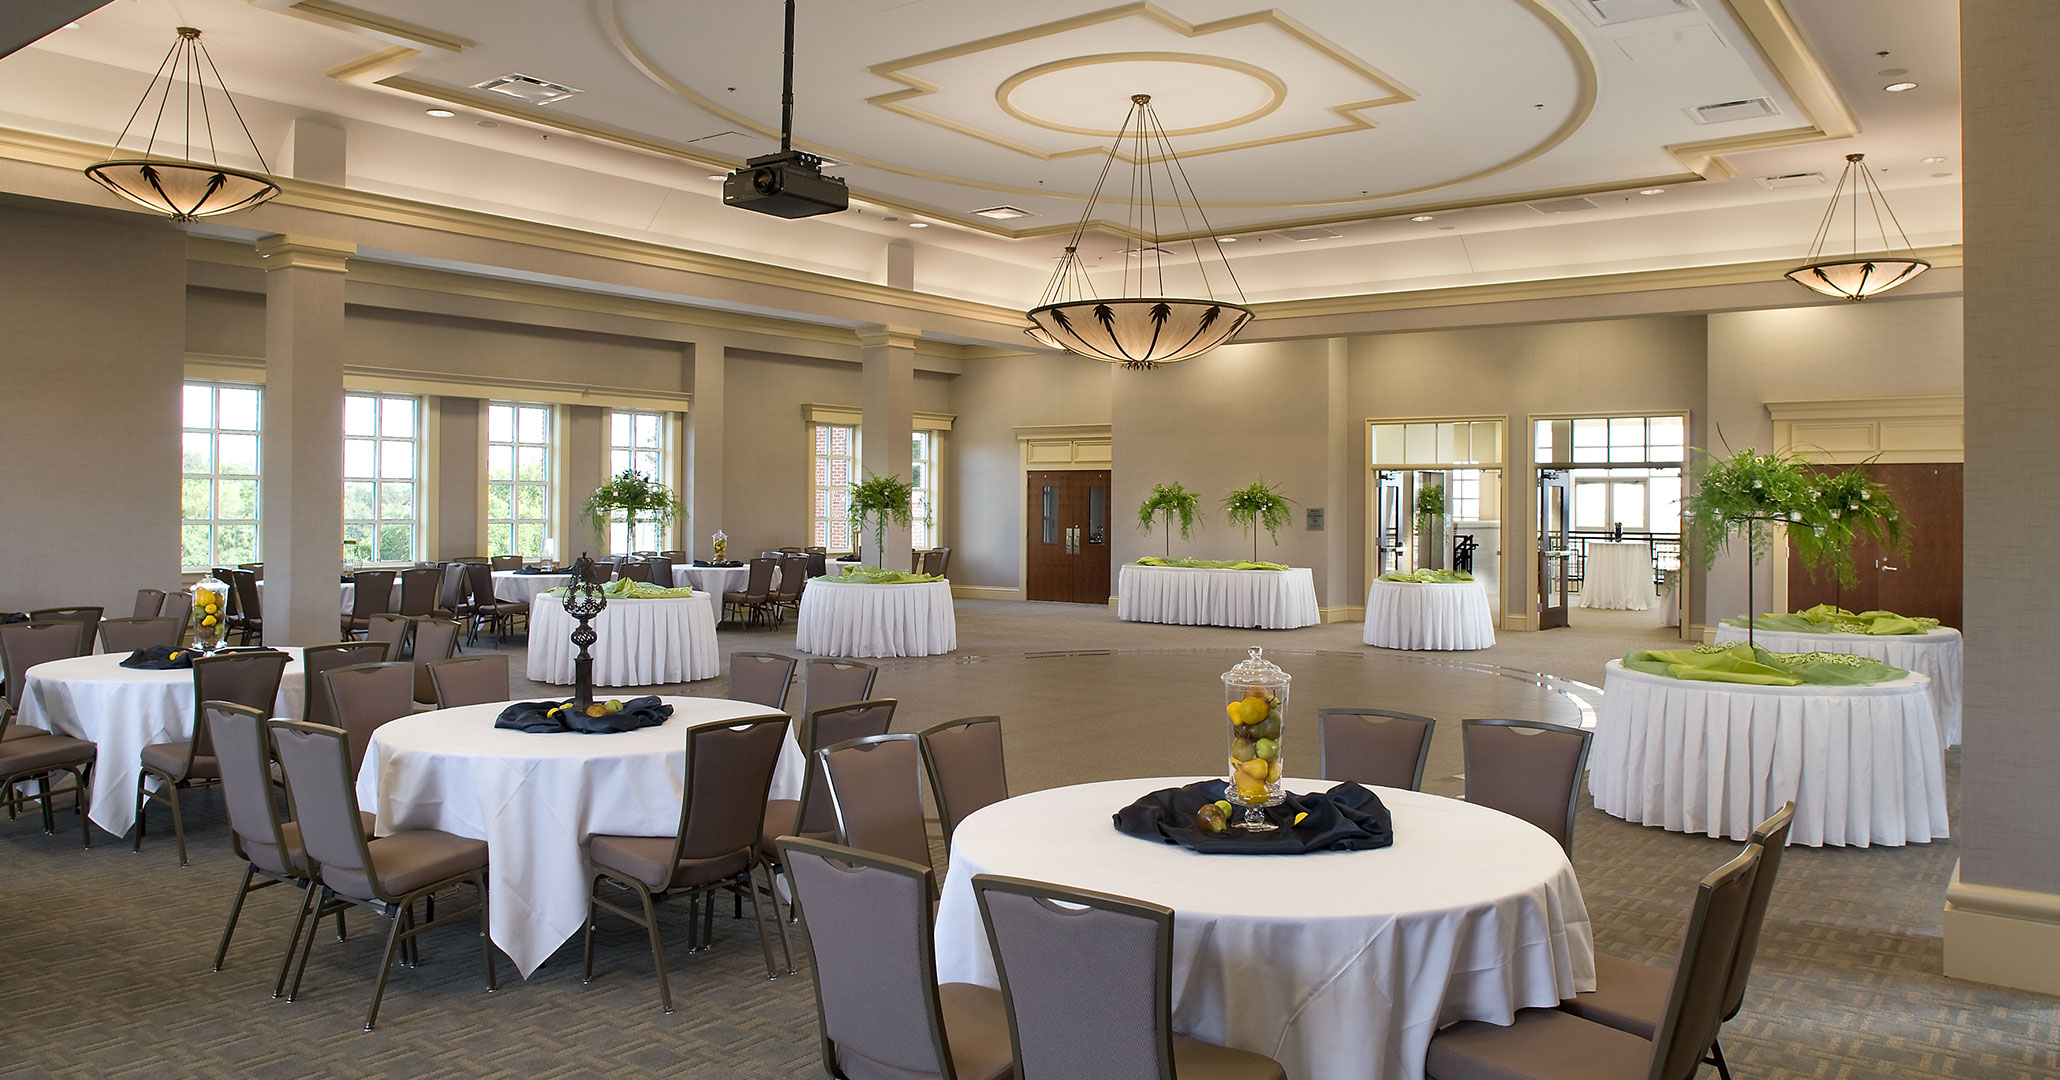 North Augusta Municipal Center hired Boudreaux architects to design wedding venue spaces.